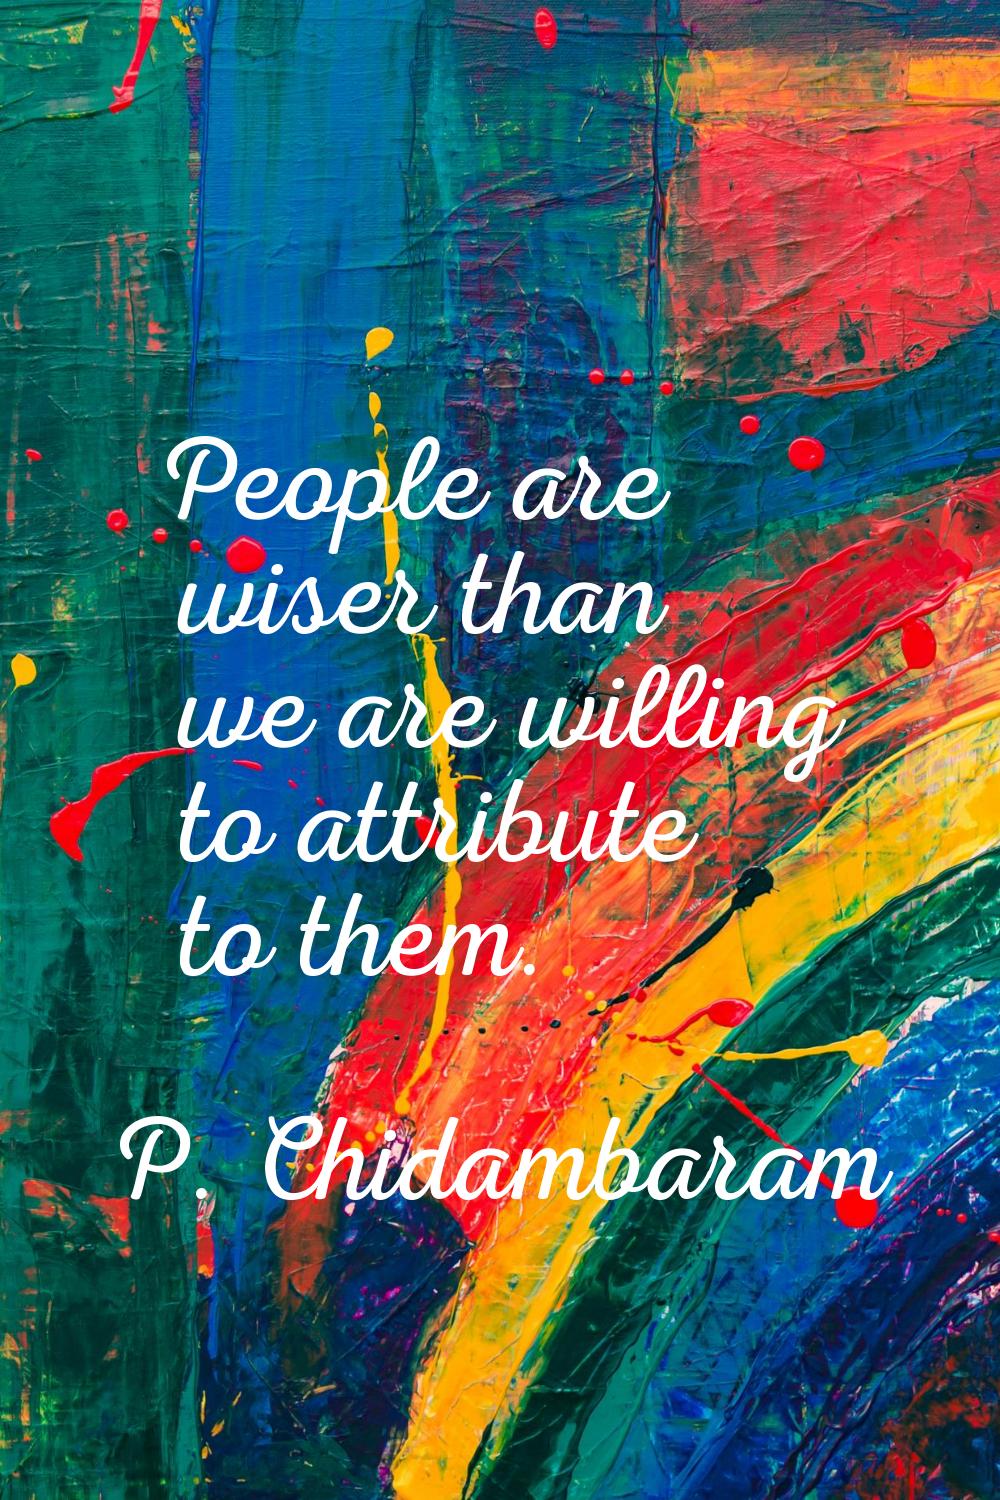 People are wiser than we are willing to attribute to them.